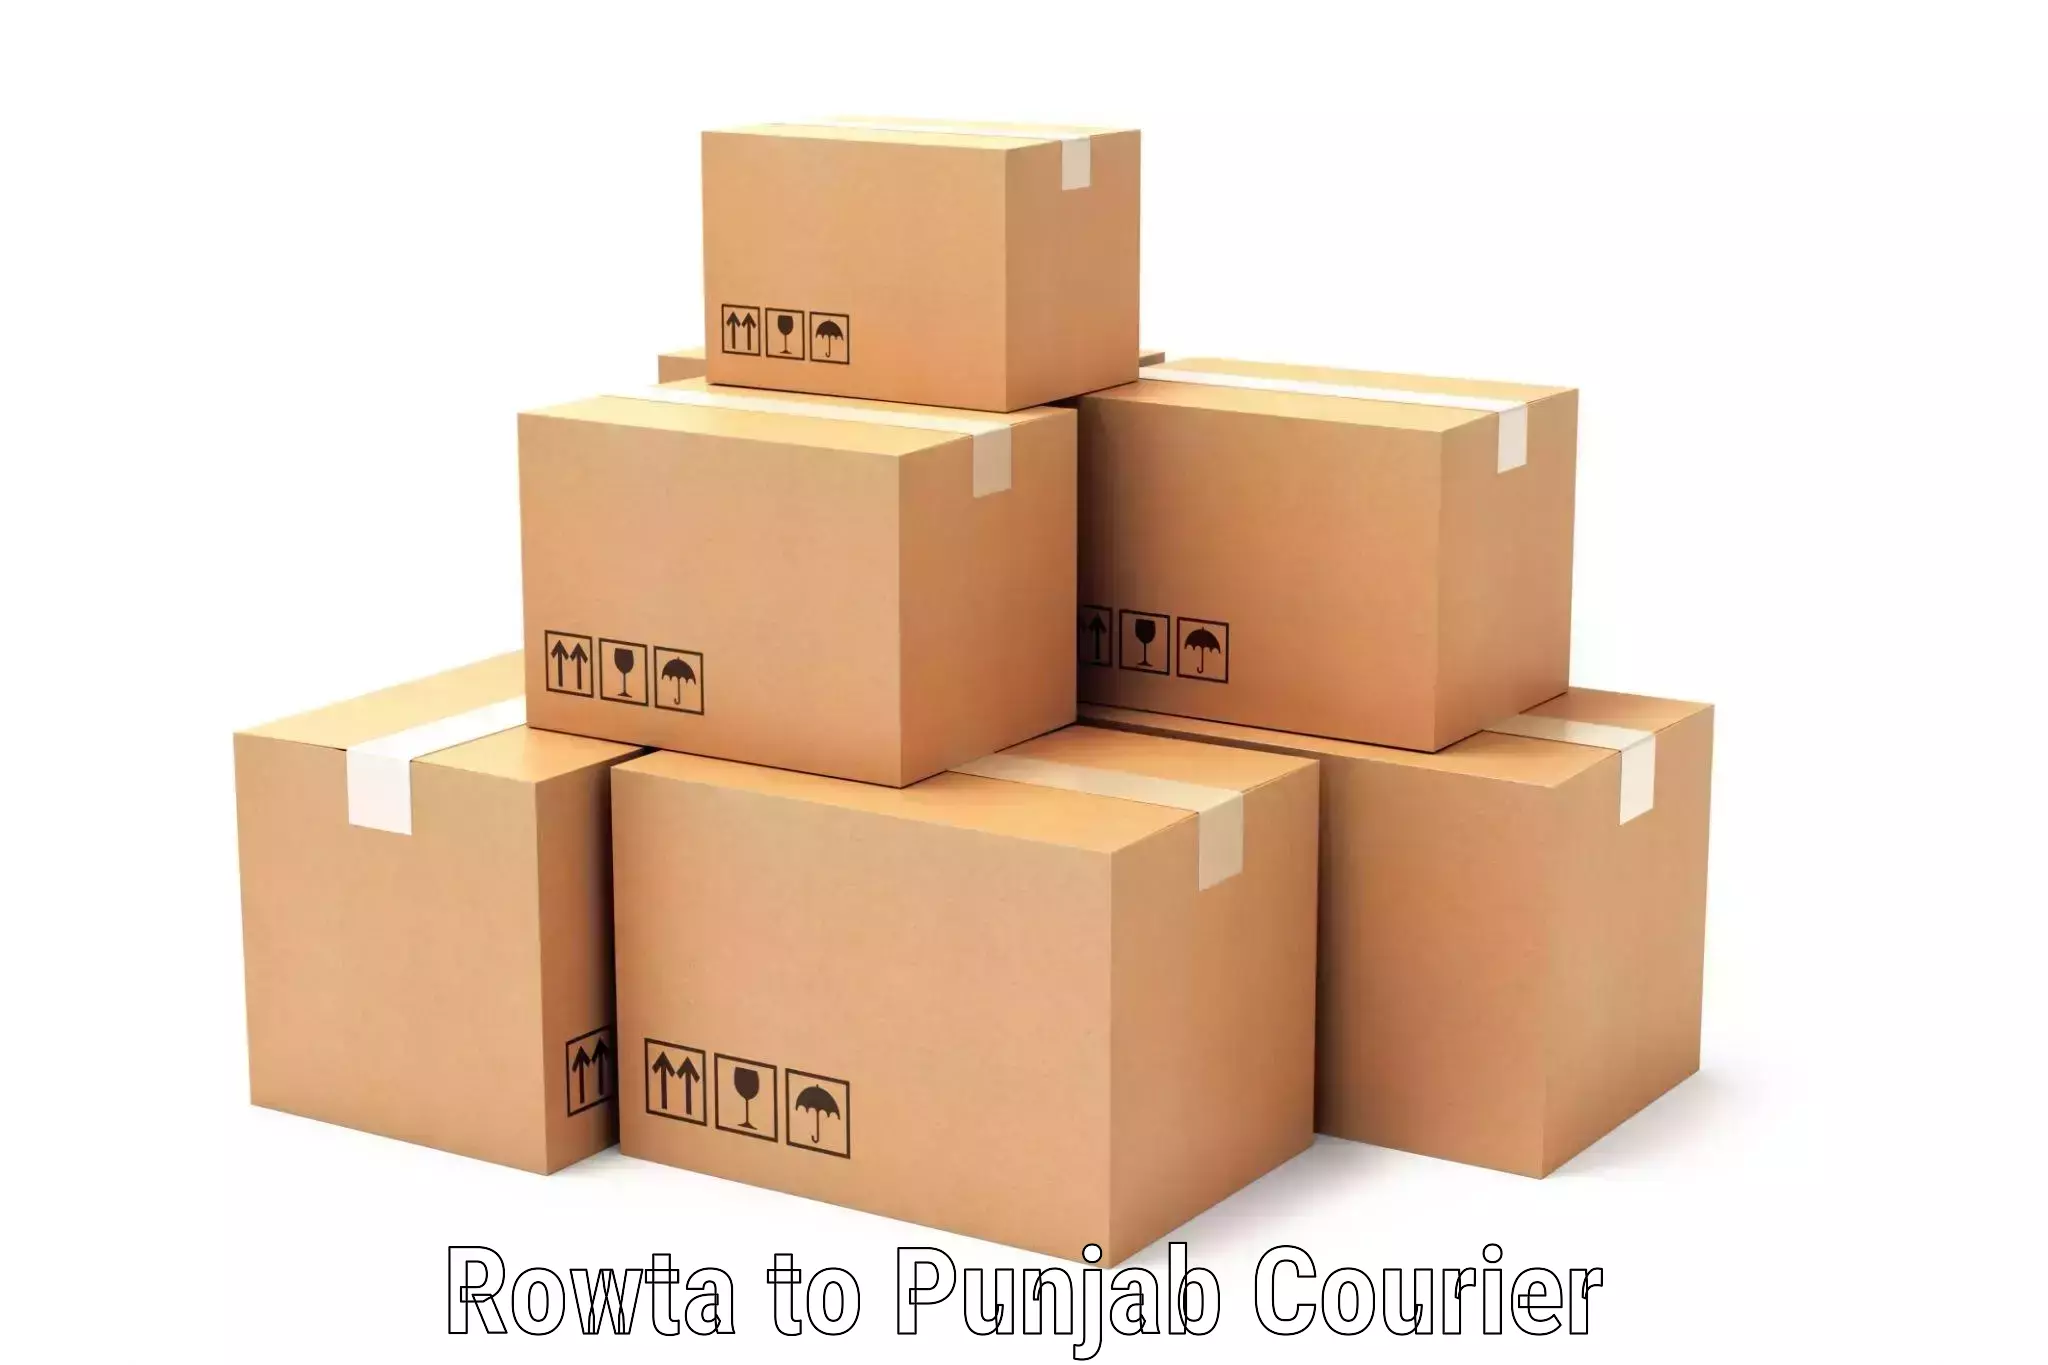 24/7 courier service Rowta to Punjab